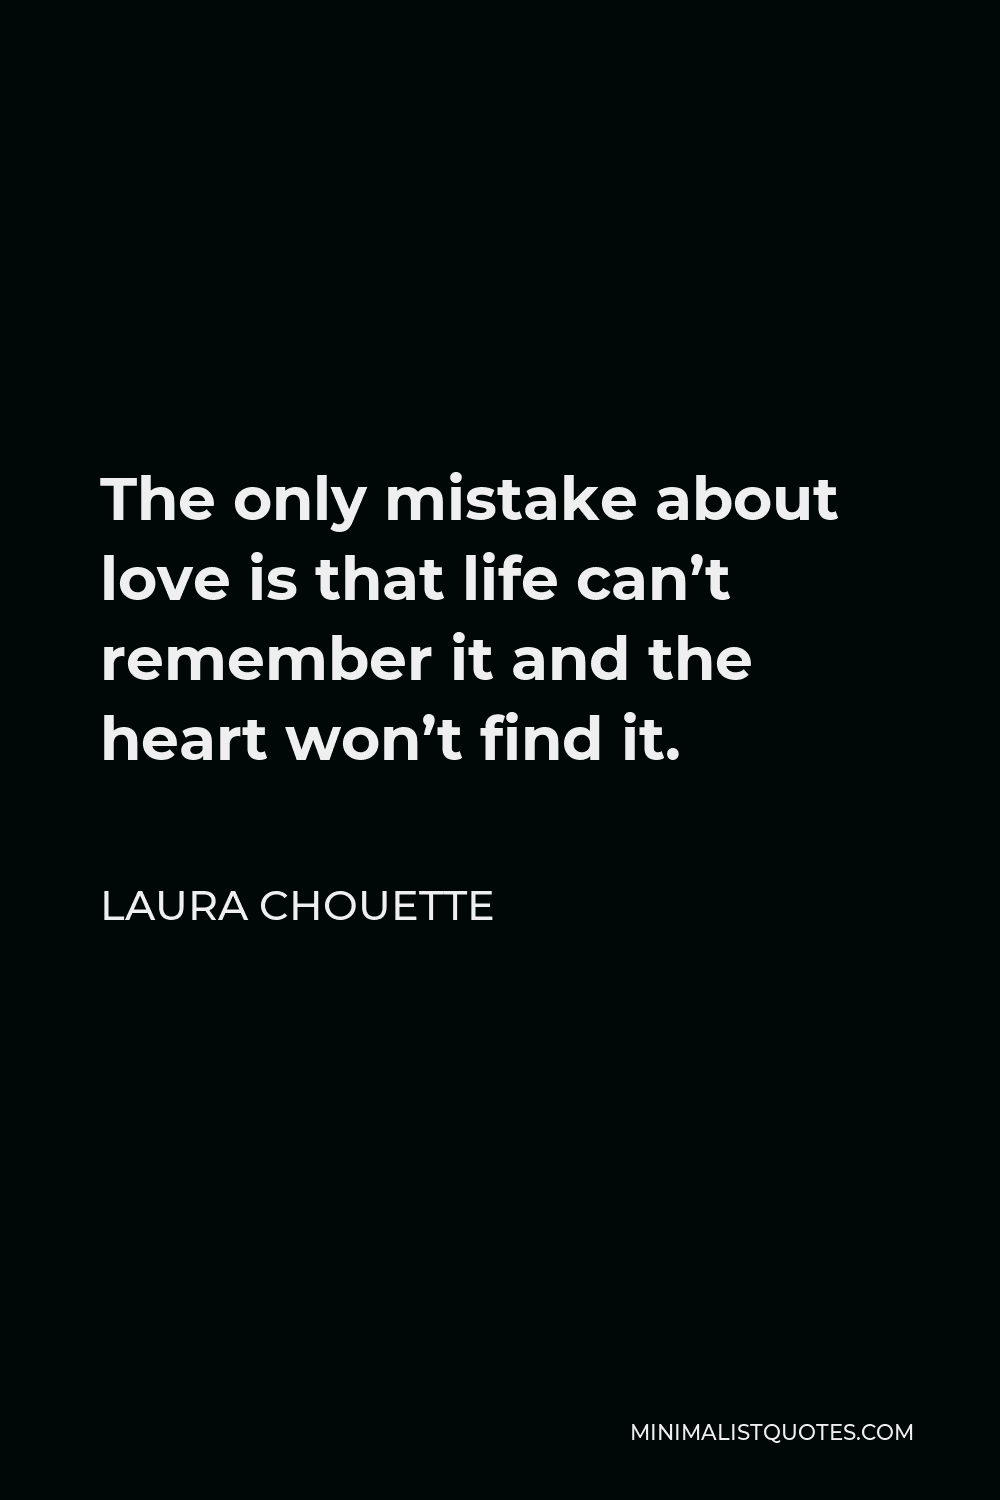 Laura Chouette Quote - The only mistake about love is that life can’t remember it and the heart won’t find it.